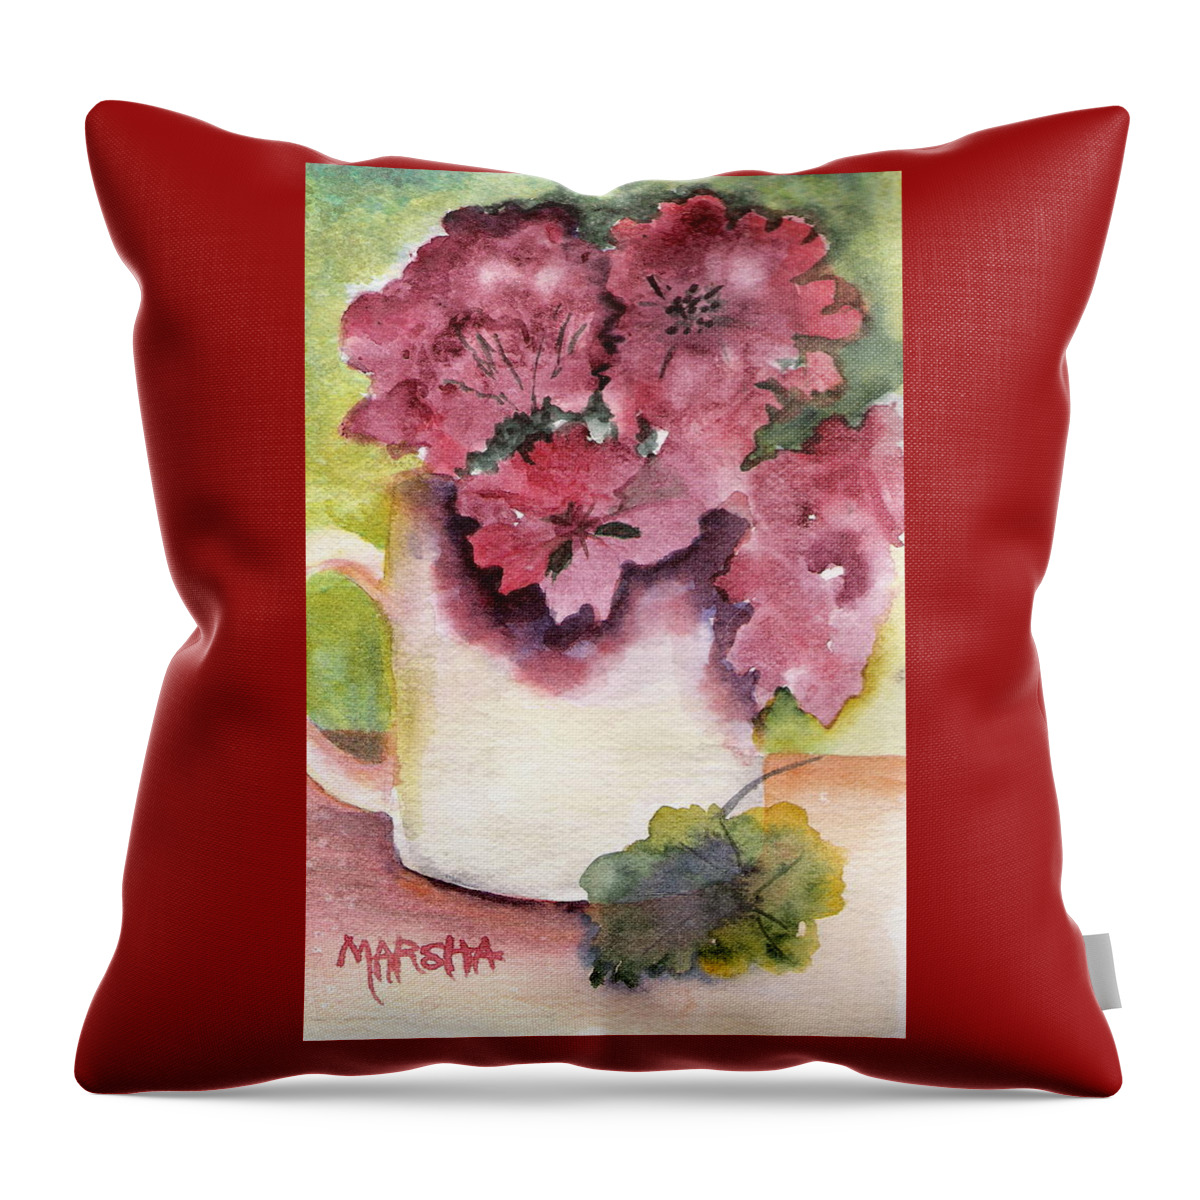 Geraniums Throw Pillow featuring the painting Geraniums in a Cup by Marsha Woods